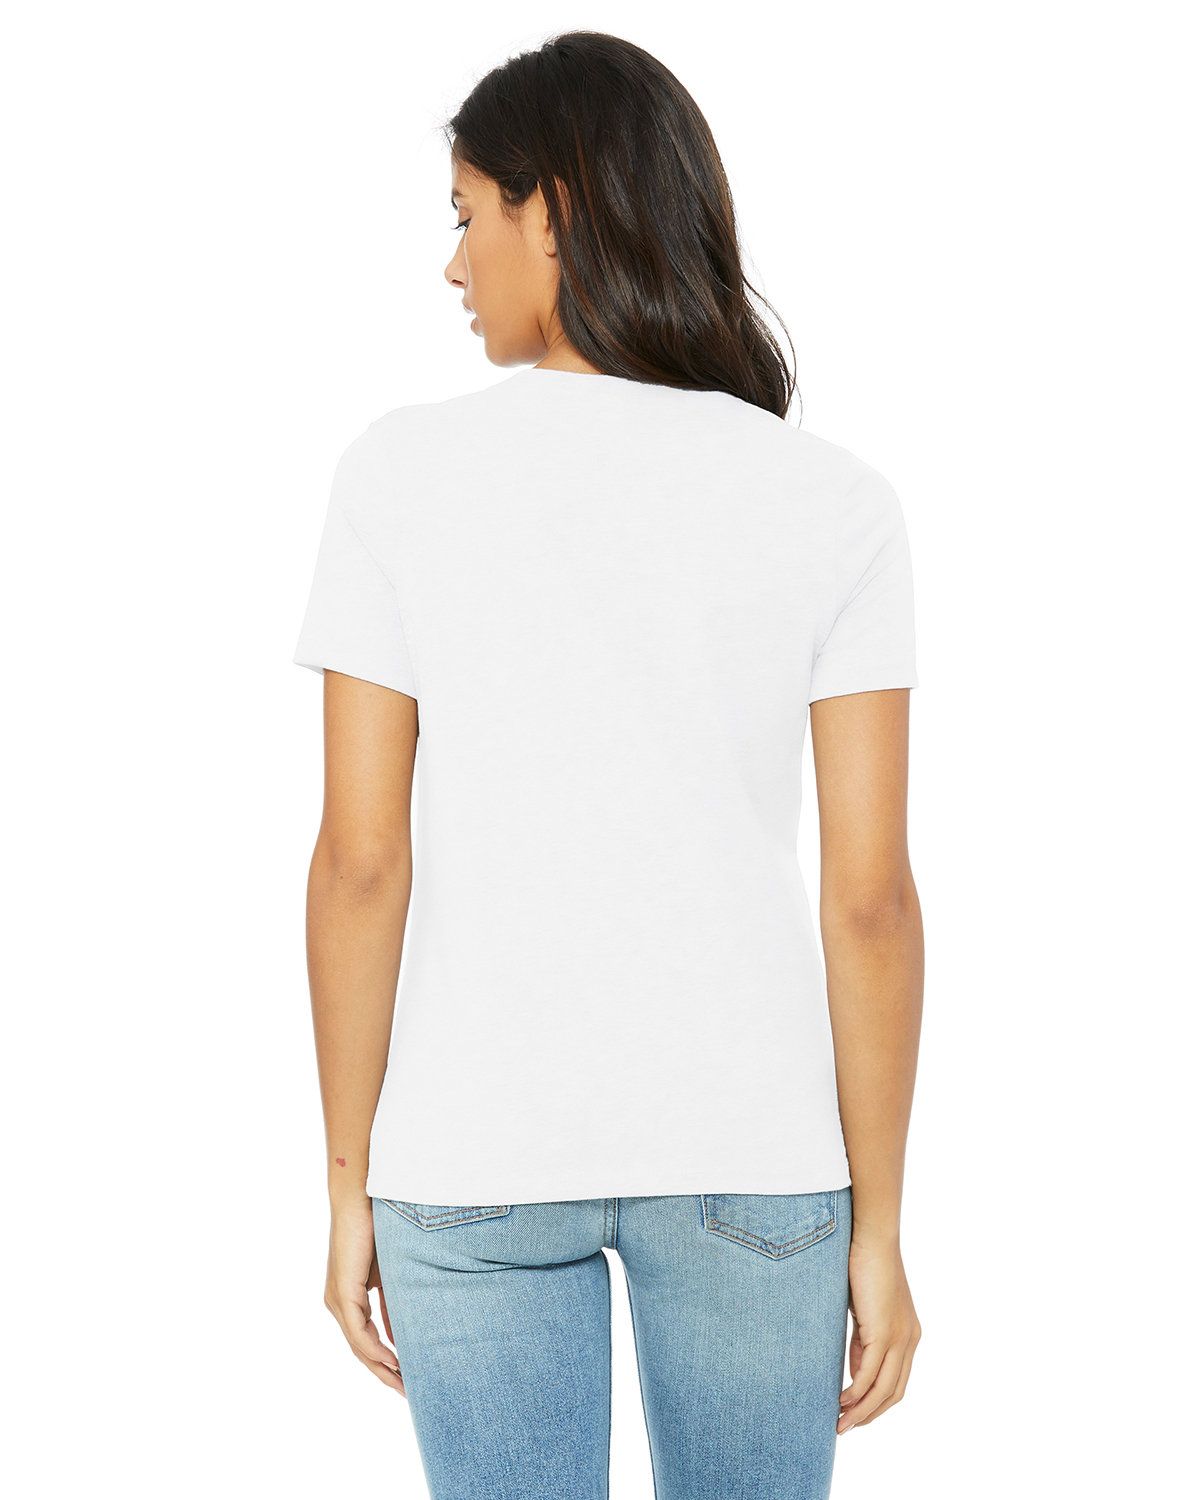 'Bella Canvas B6400 Ladies Relaxed Jersey Short Sleeve T-Shirt'